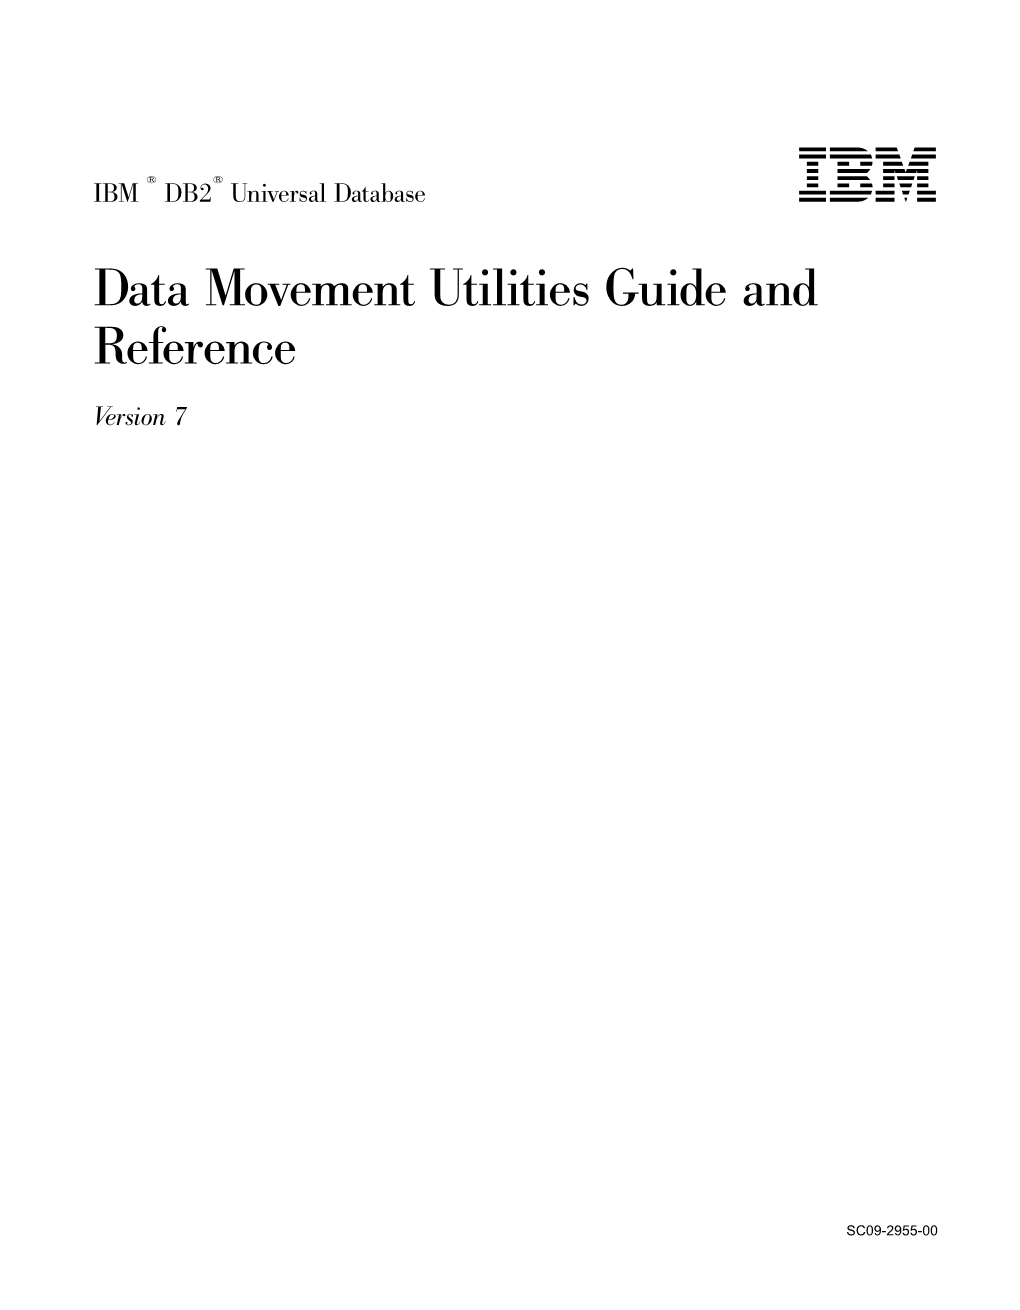 Data Movement Utilities Guide and Reference Ve R S I O N 7